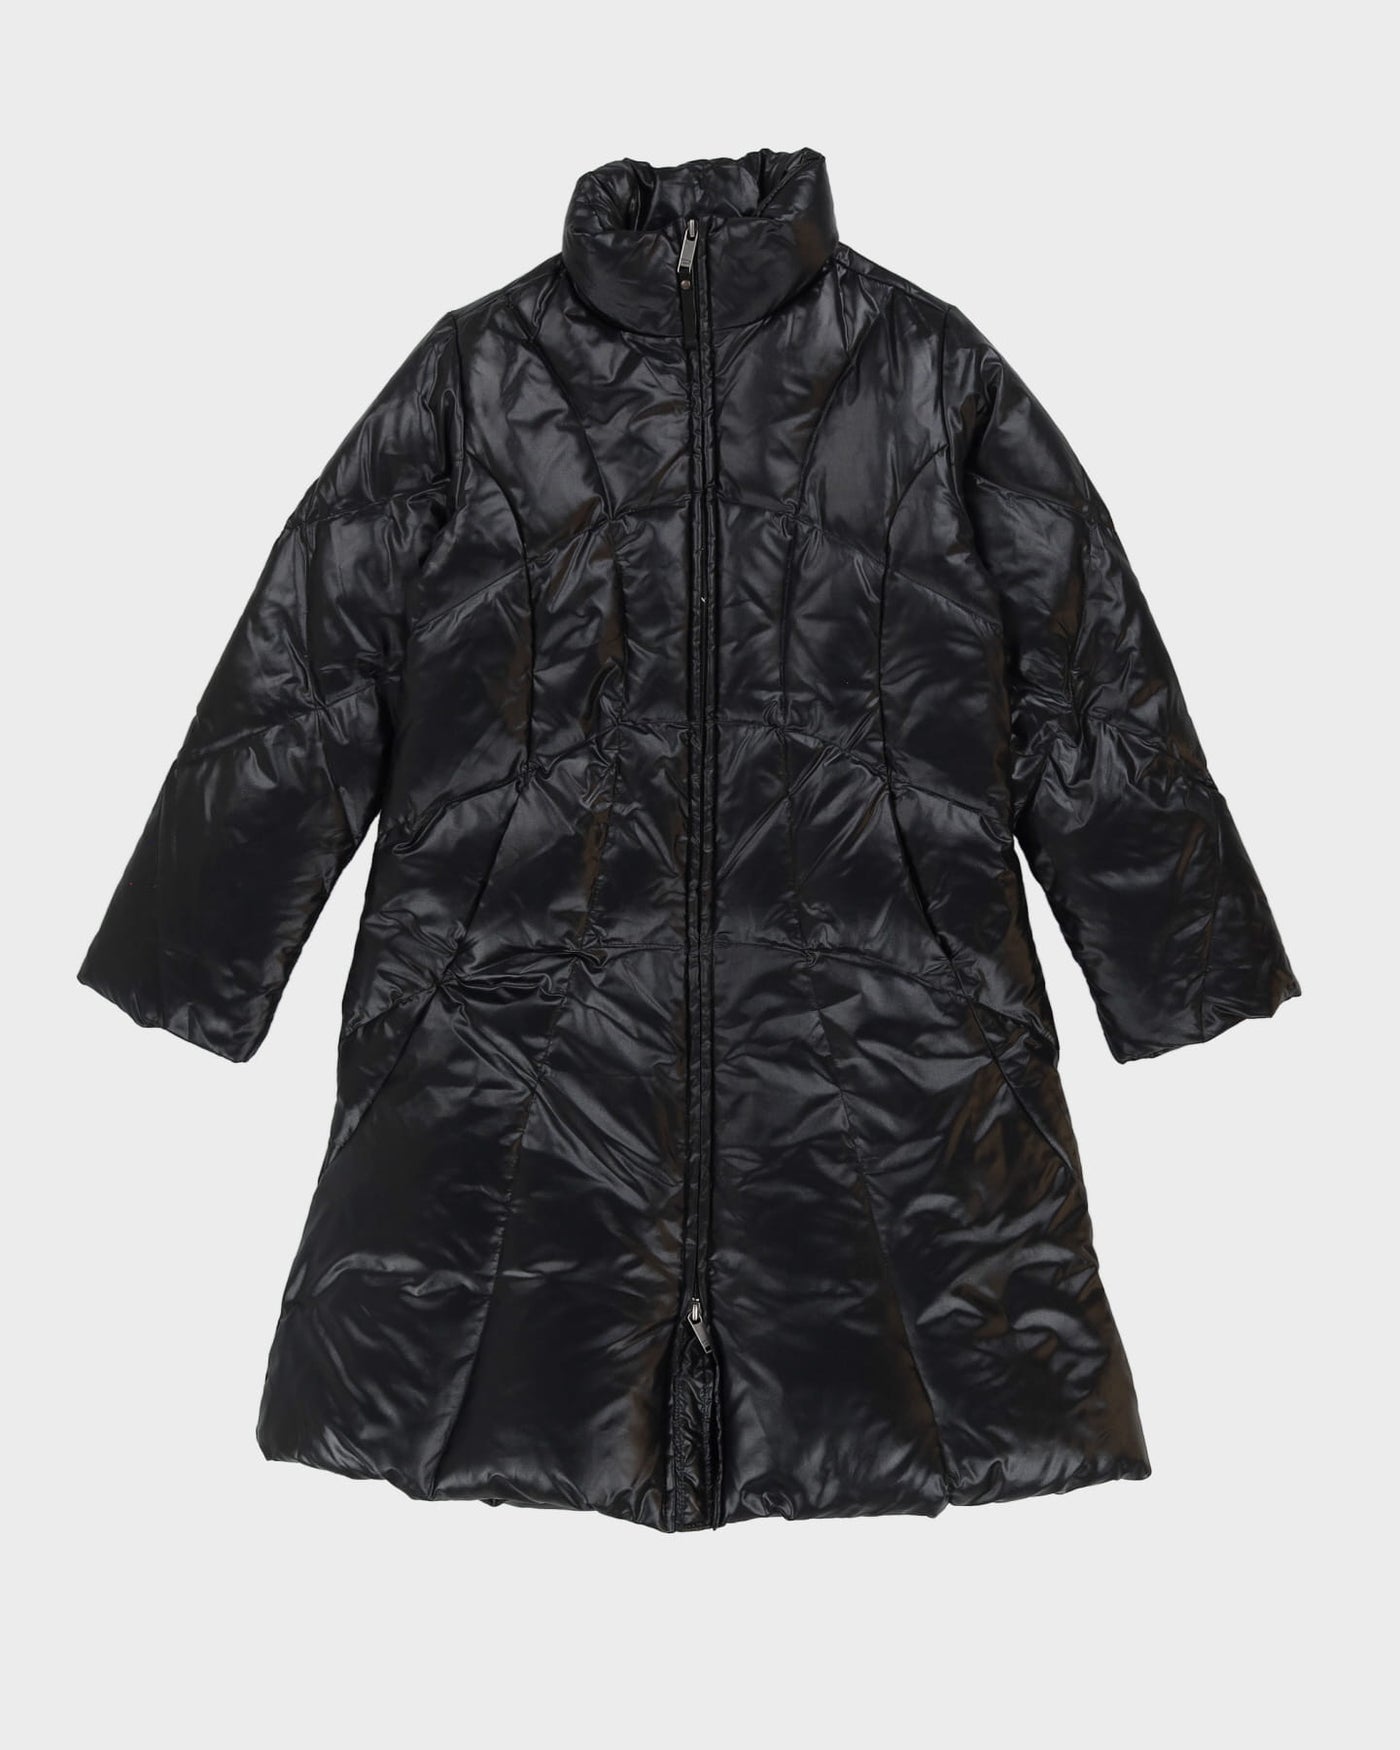 Deadstock With Tags Diesel Black Puffer Jacket - M / L